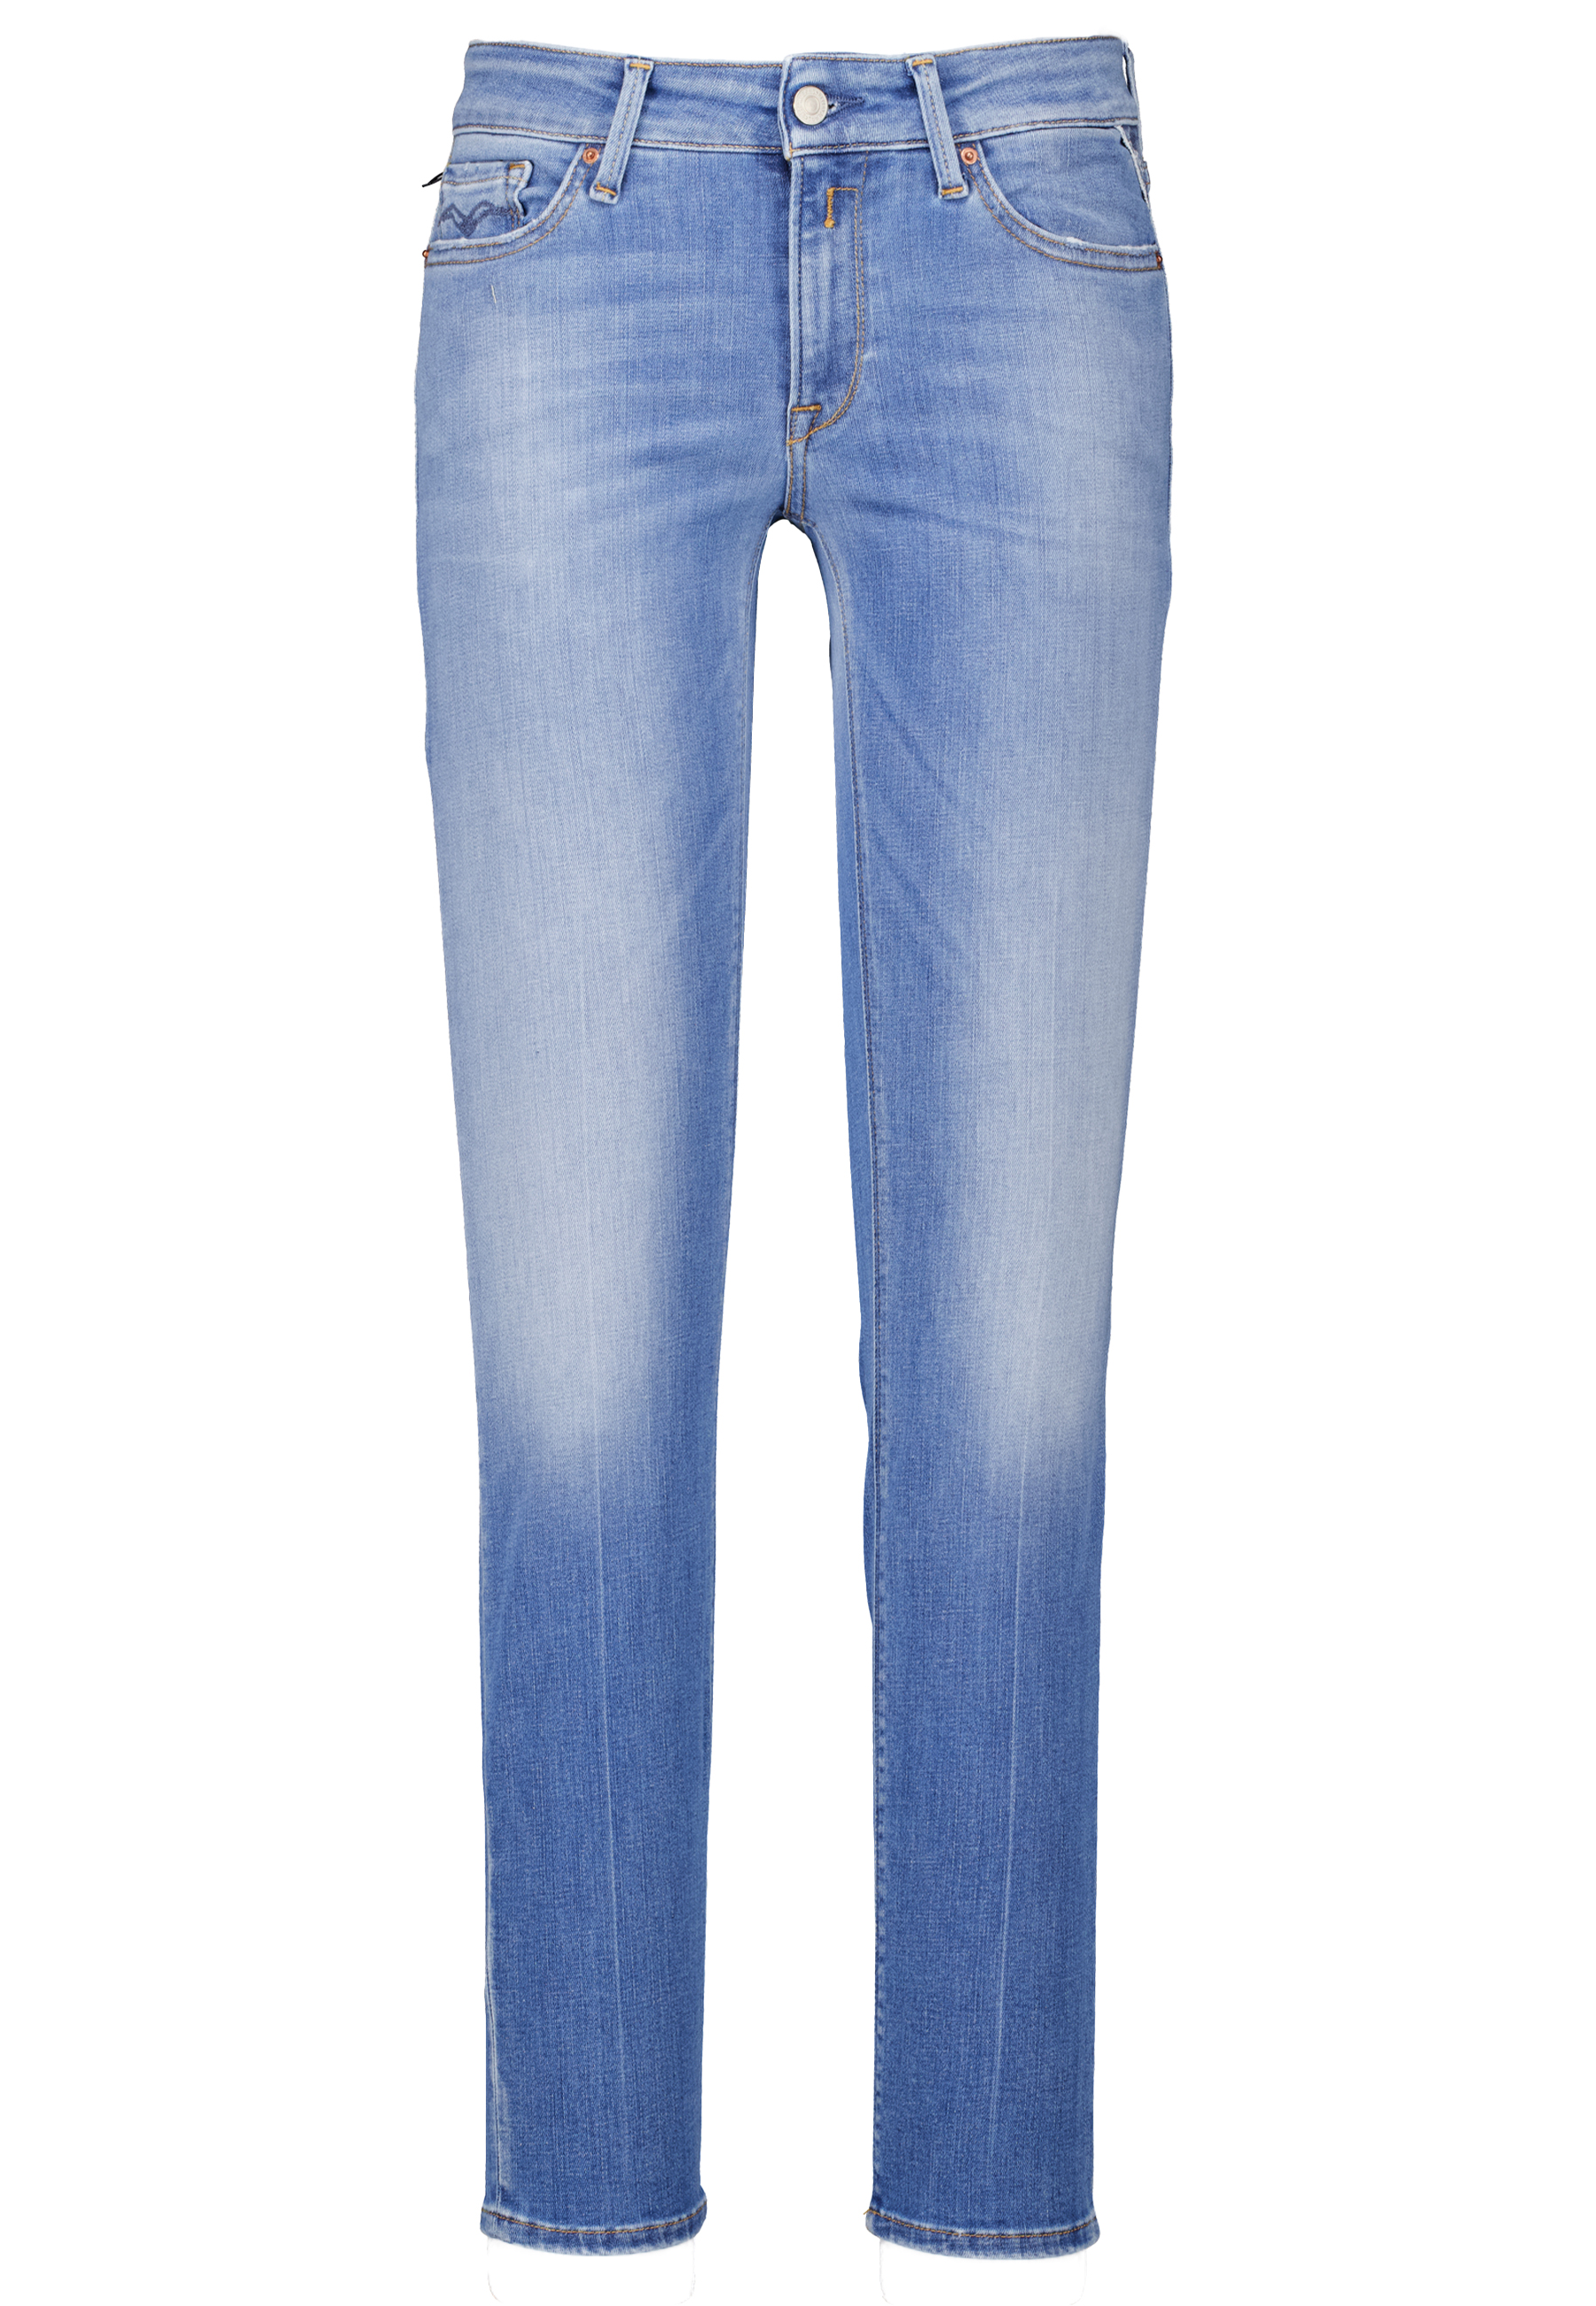 Replay jeans jeans Dames maat 27/30